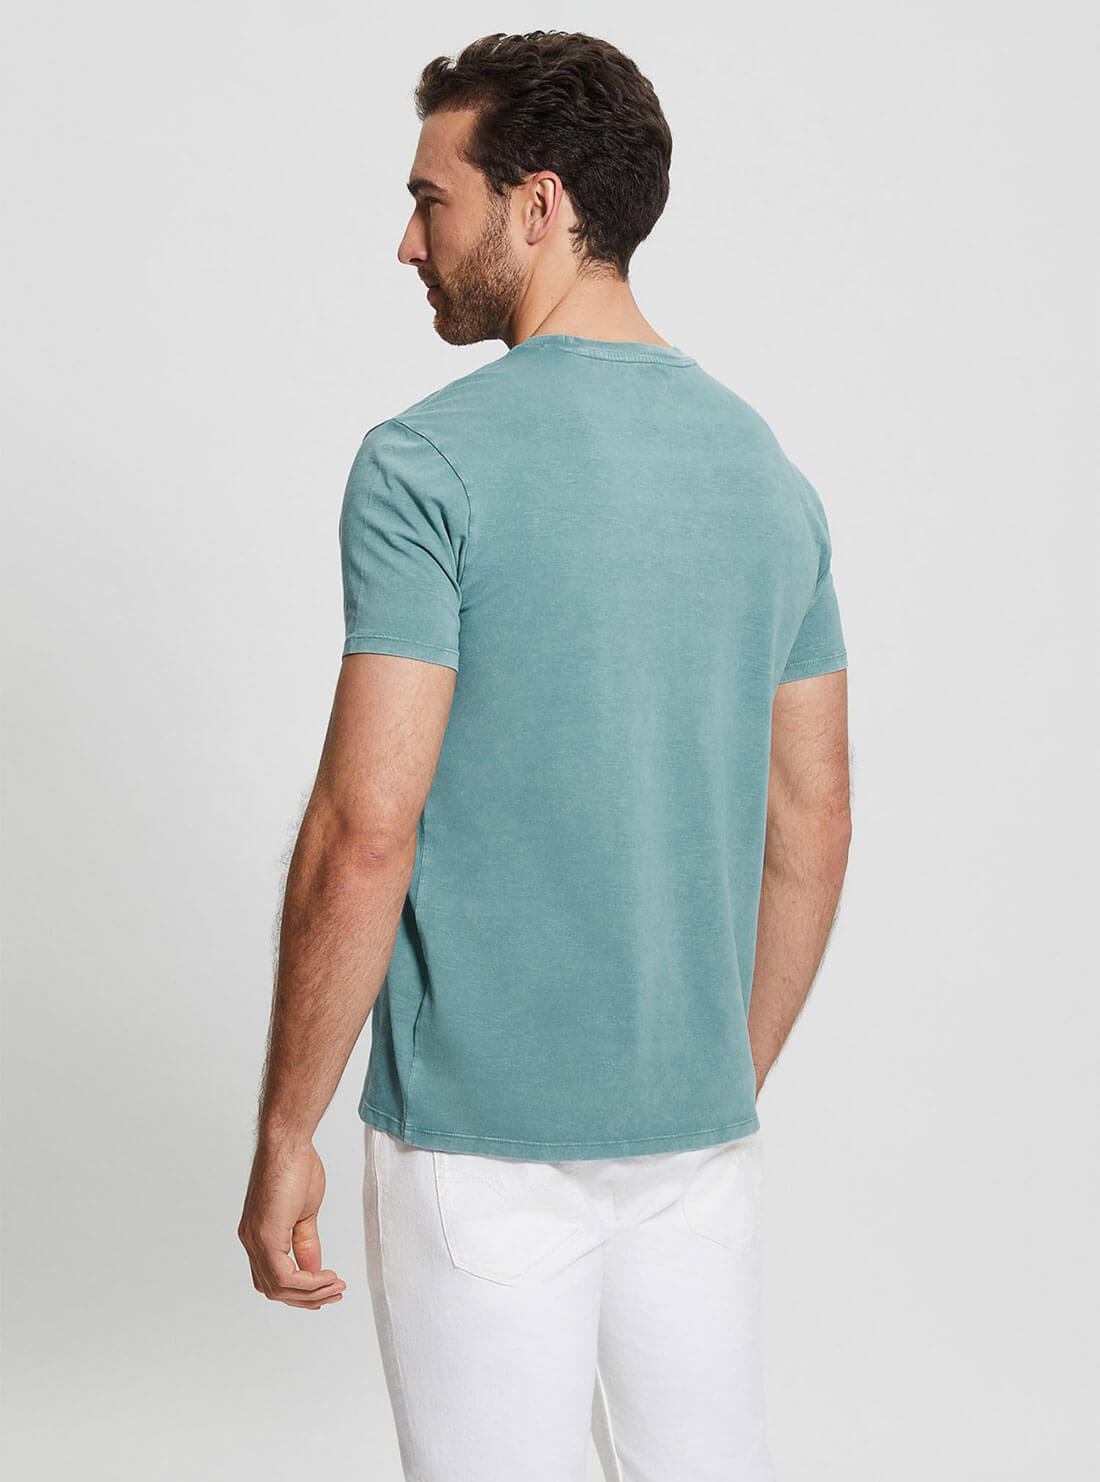 Teal Blue Eli Washed T-Shirt | GUESS Men's Apparel | back view